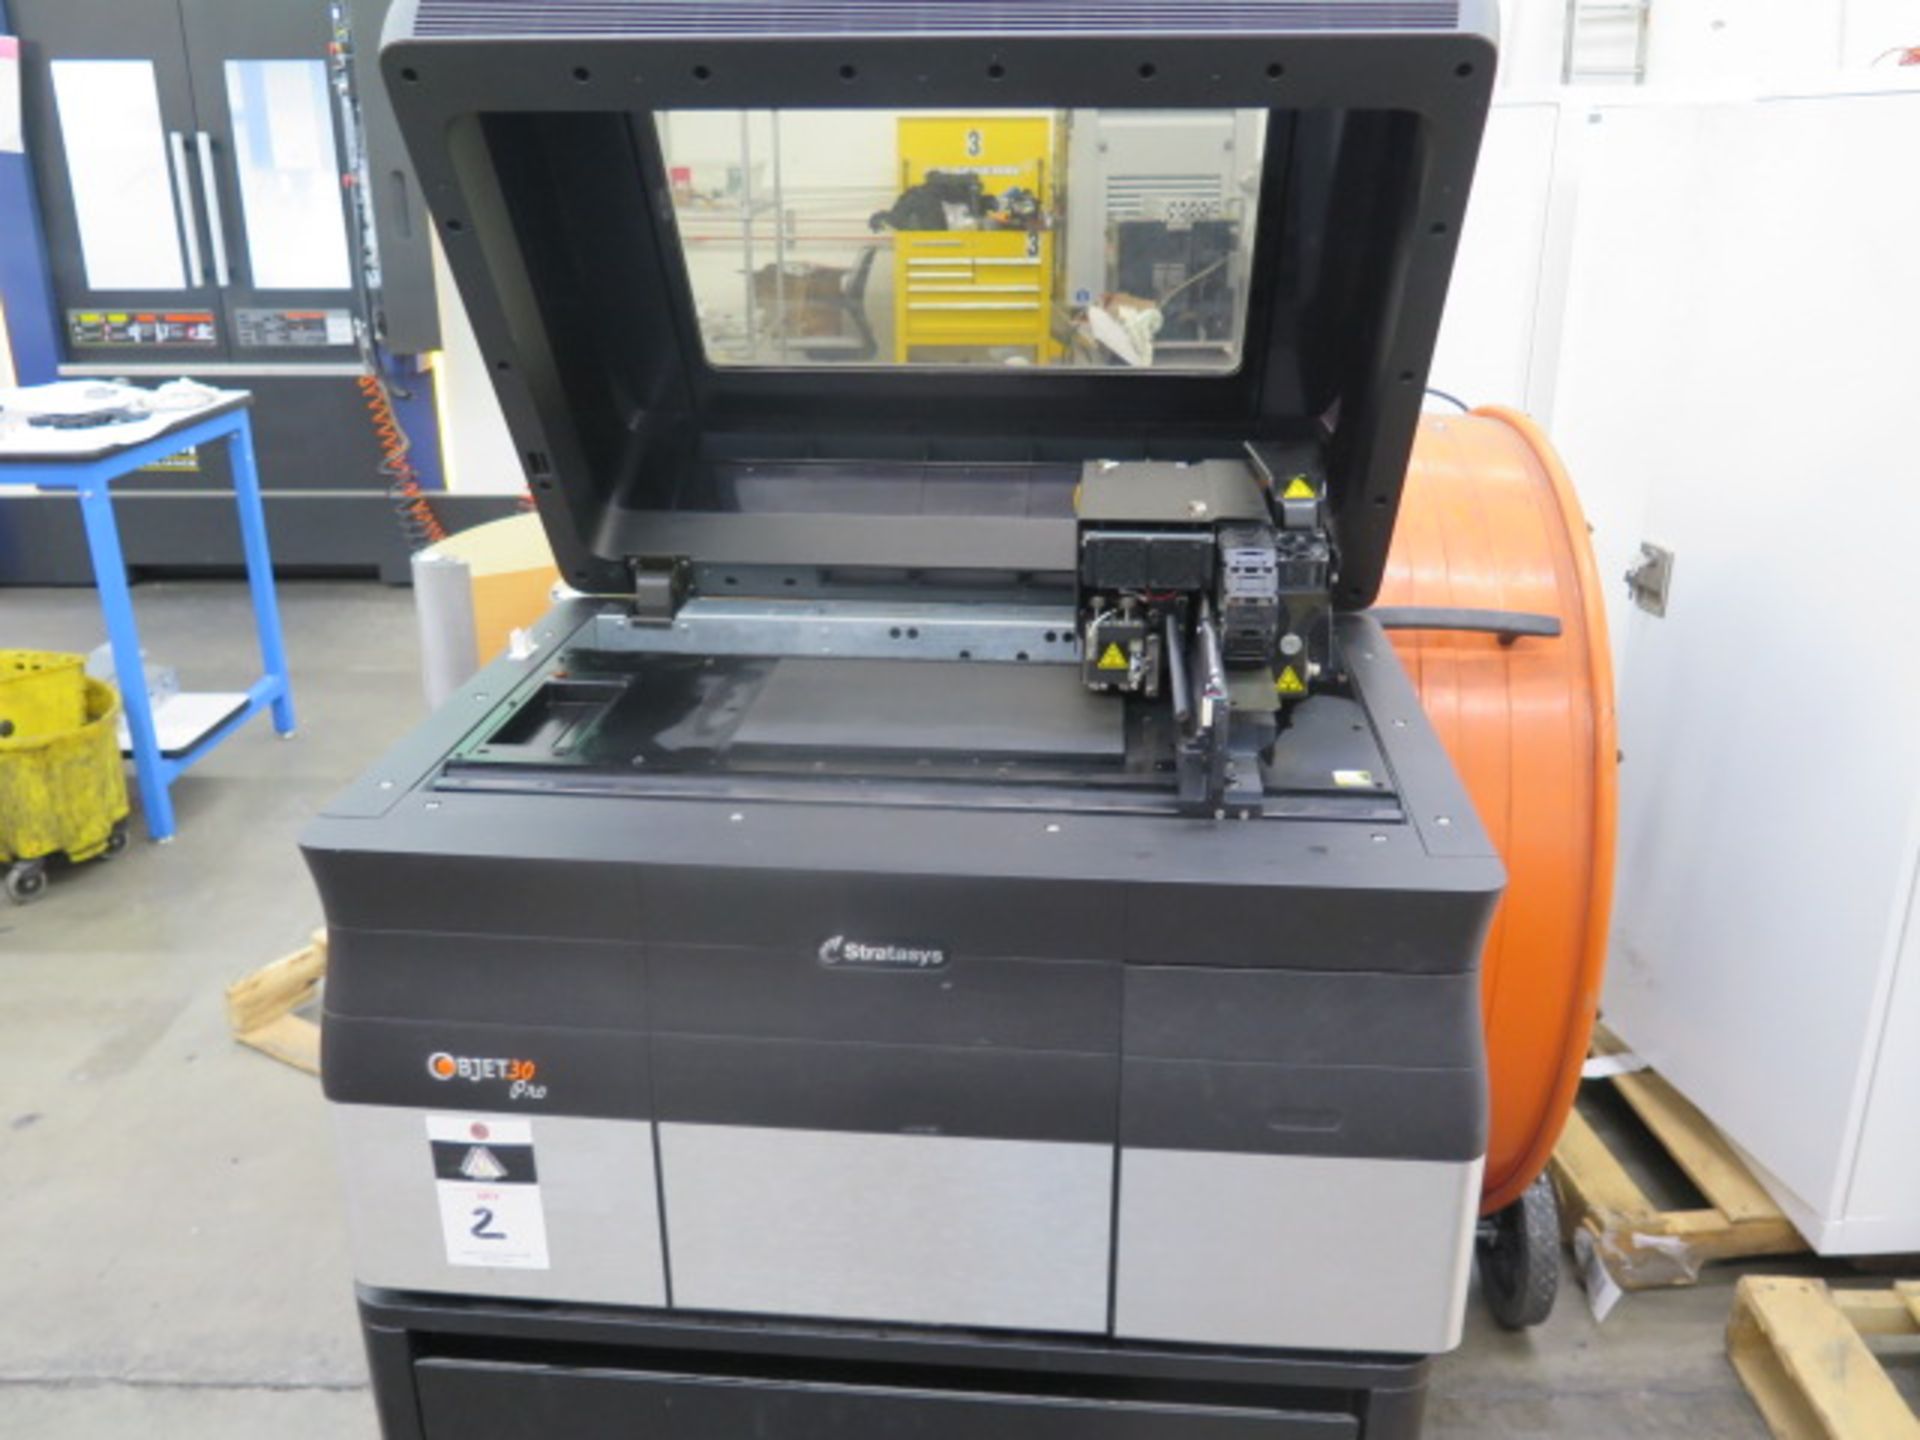 2013 Stratasys OBJET 30 Pro Industrial 3D Printer s/n 2240311 w/ Stratasys Controls, SOLD AS IS - Image 8 of 25